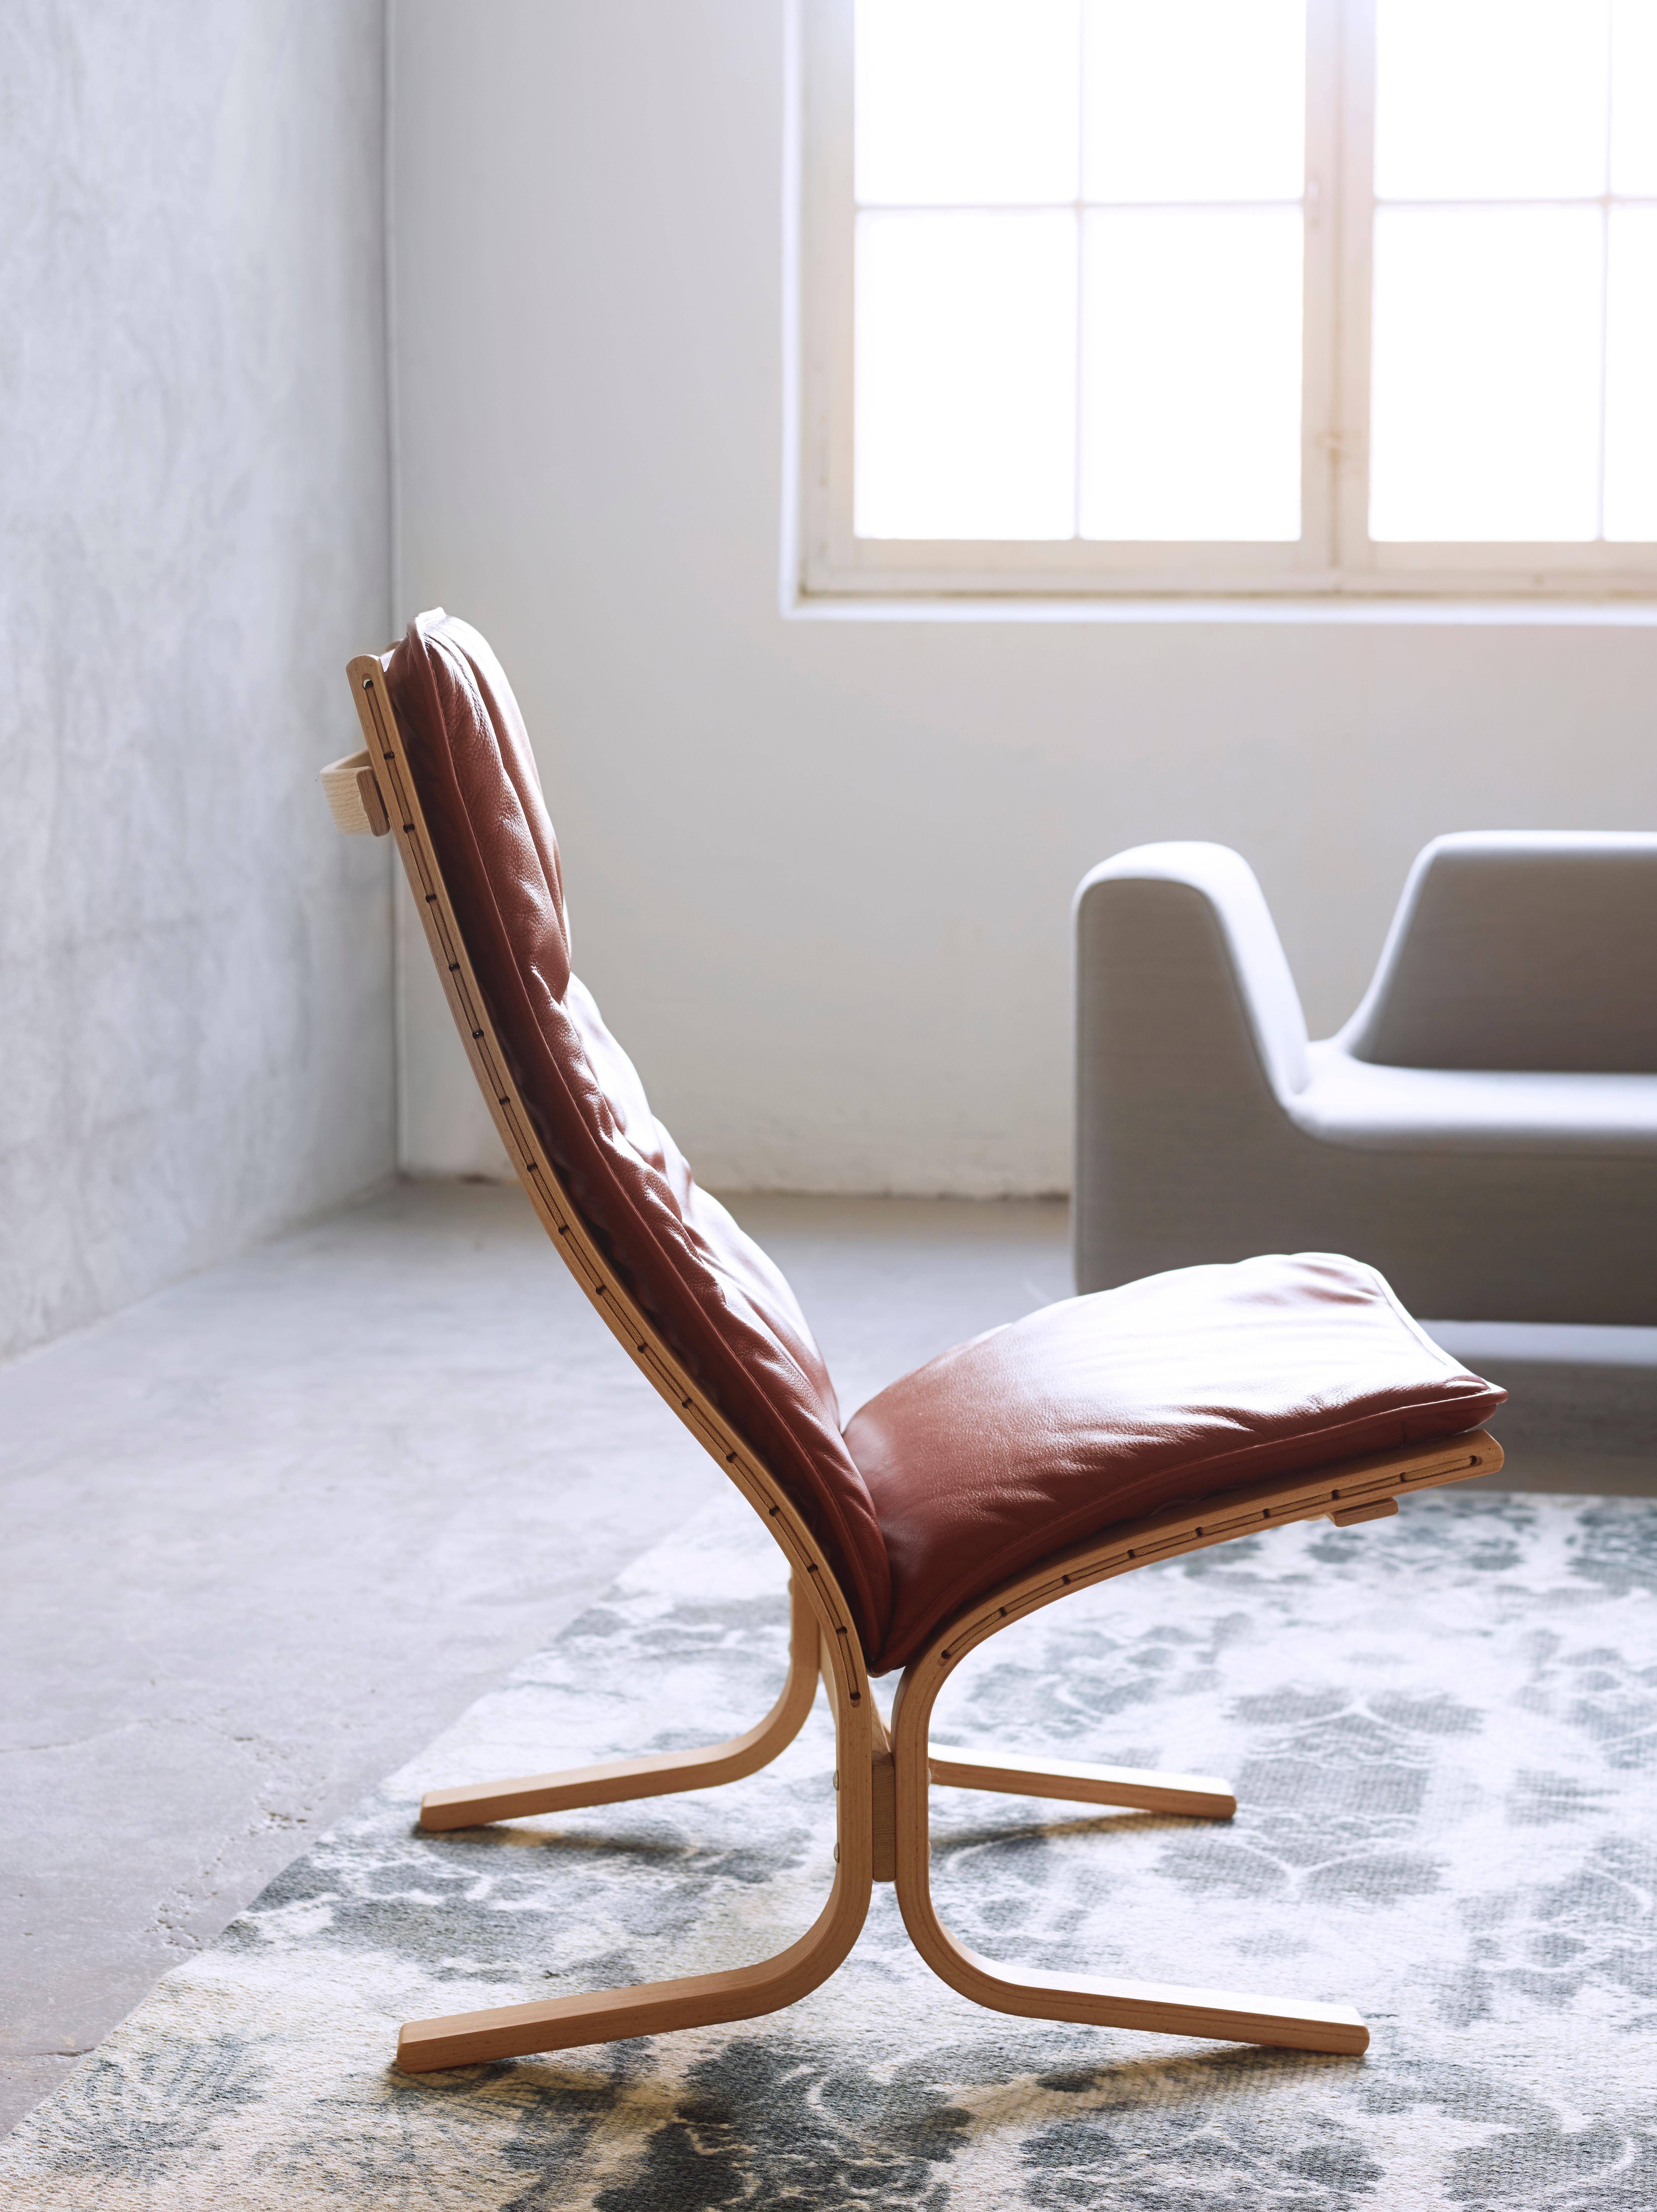 SIESTA FIORA was launched in 2005 to celebrate Siesta’s 40th anniversary. SIESTA FIORA stands out as an icon where simplicity, minimalism and functionality are all represented in one chair. To Ingmar Relling, the correlation between design and